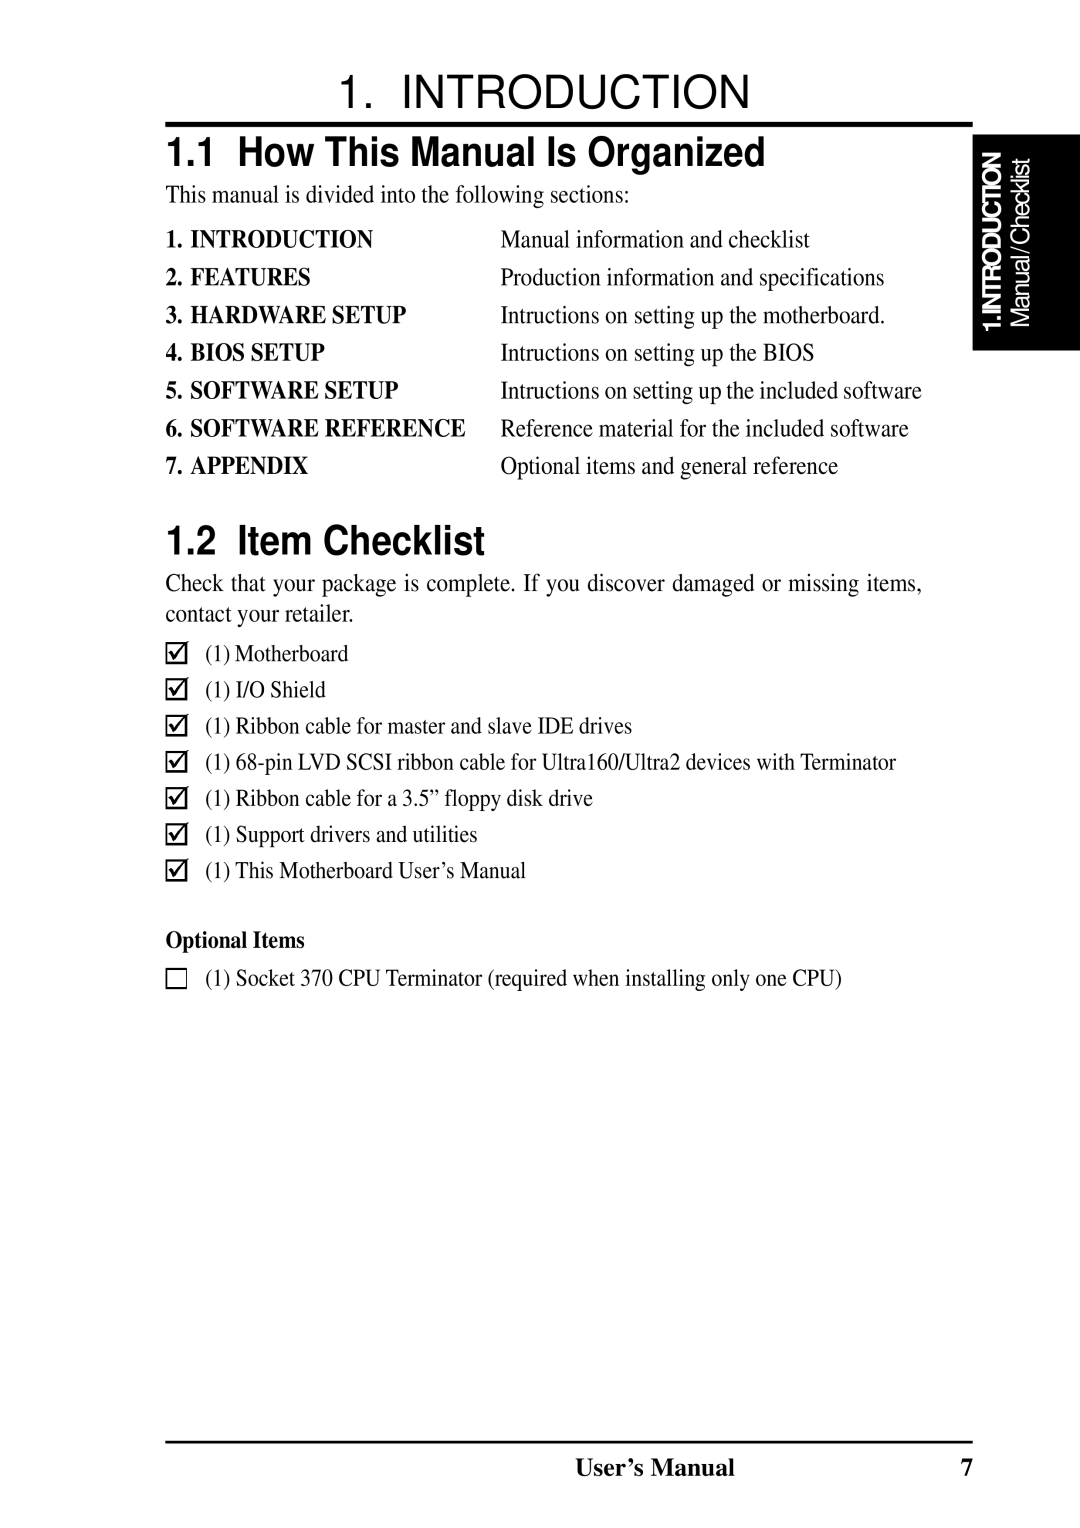 Fujitsu D1241 manual How This Manual Is Organized, Item Checklist, Manual information and checklist 